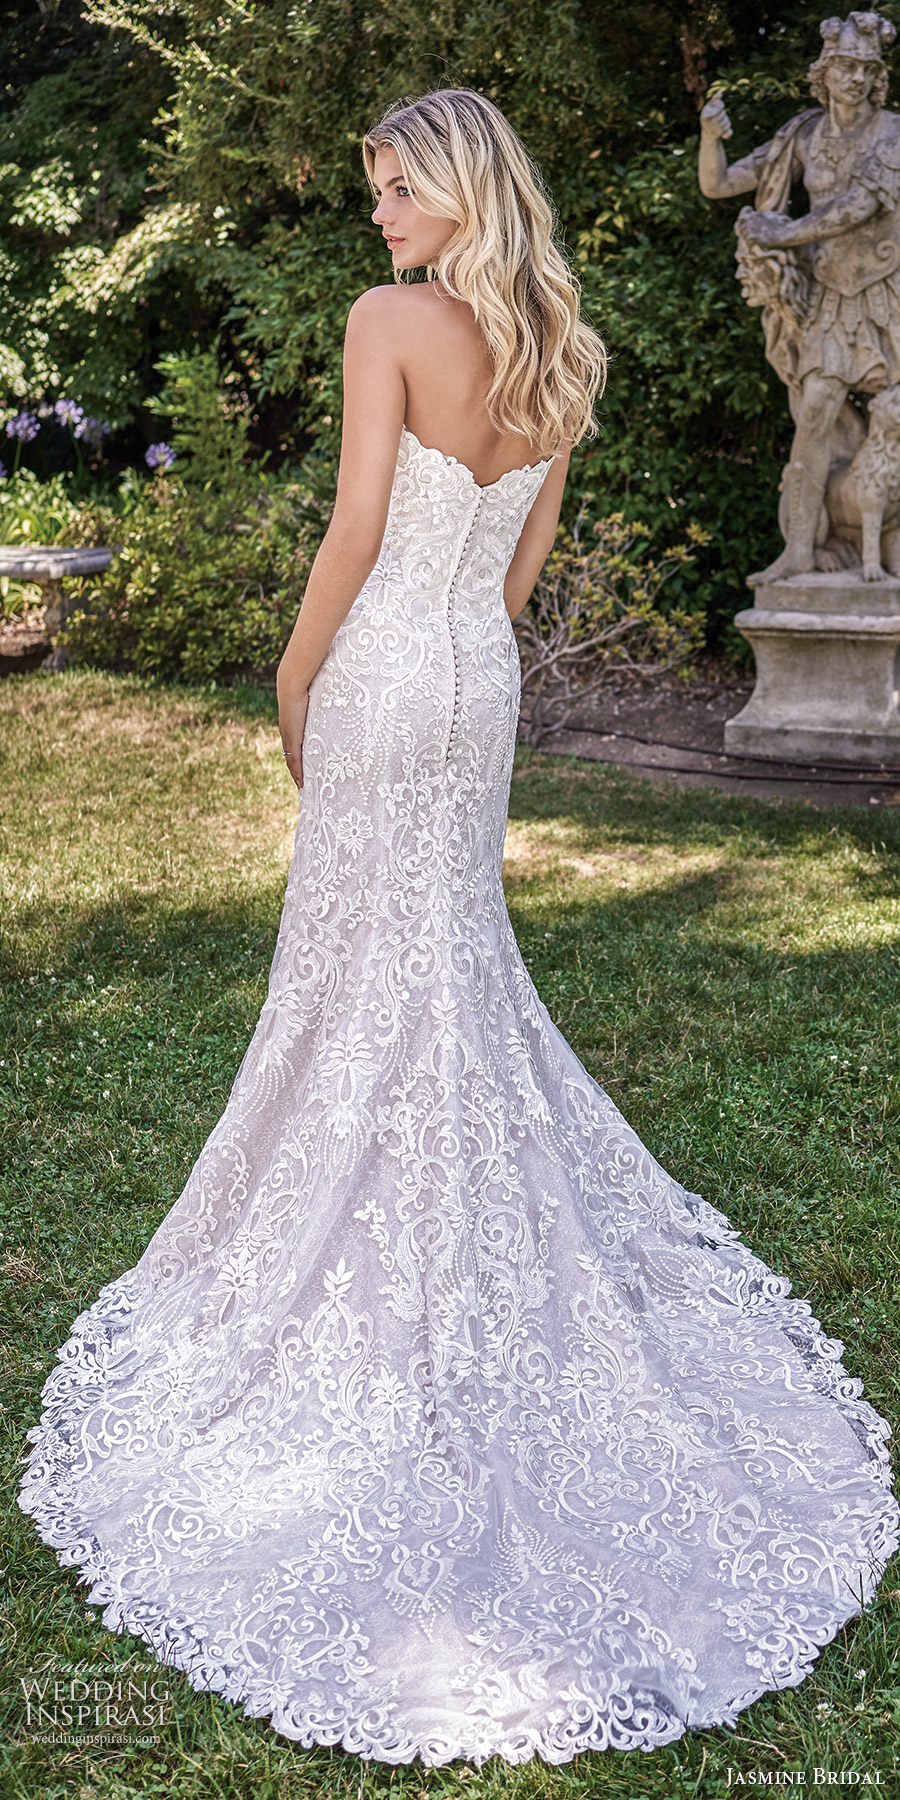 jasmine spring 2020 collection strapless sweetheart neckline fully embellished lace fit flare mermaid wedding dress chapel train (11) bv